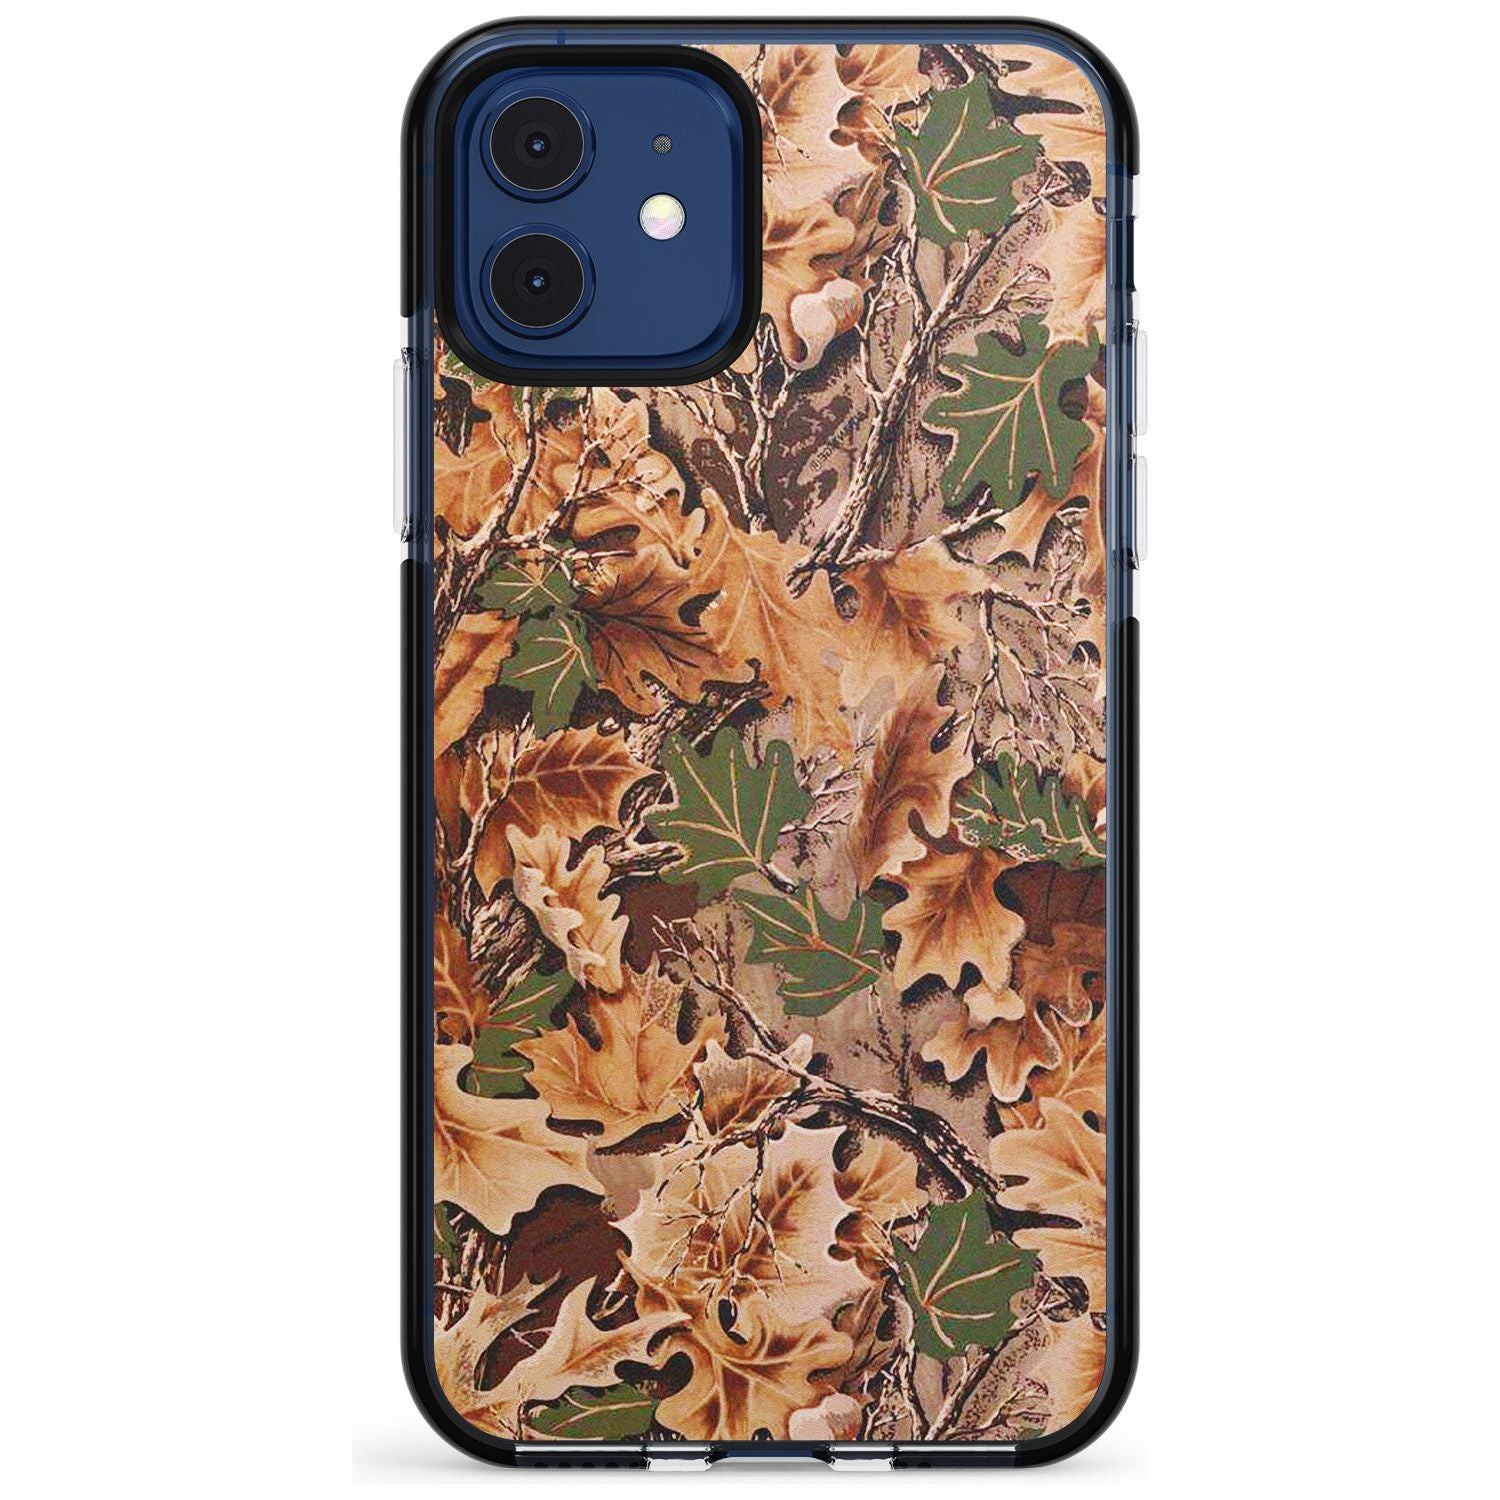 Leaves Camo Black Impact Phone Case for iPhone 11 Pro Max